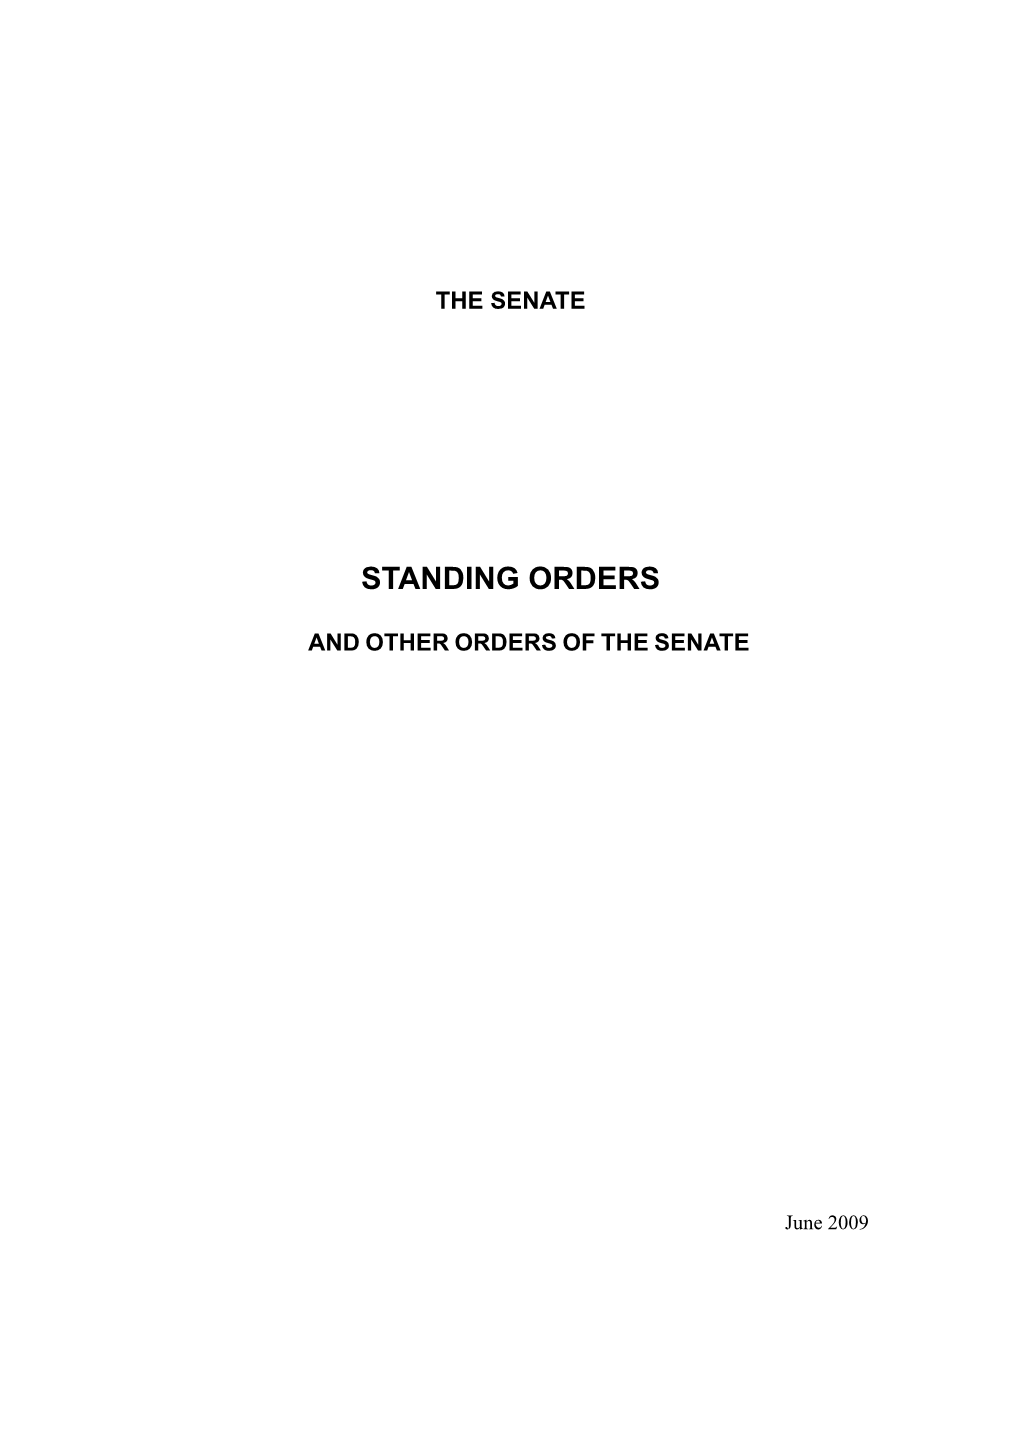 Publication: Standing Orders and Other Orders of the Senate